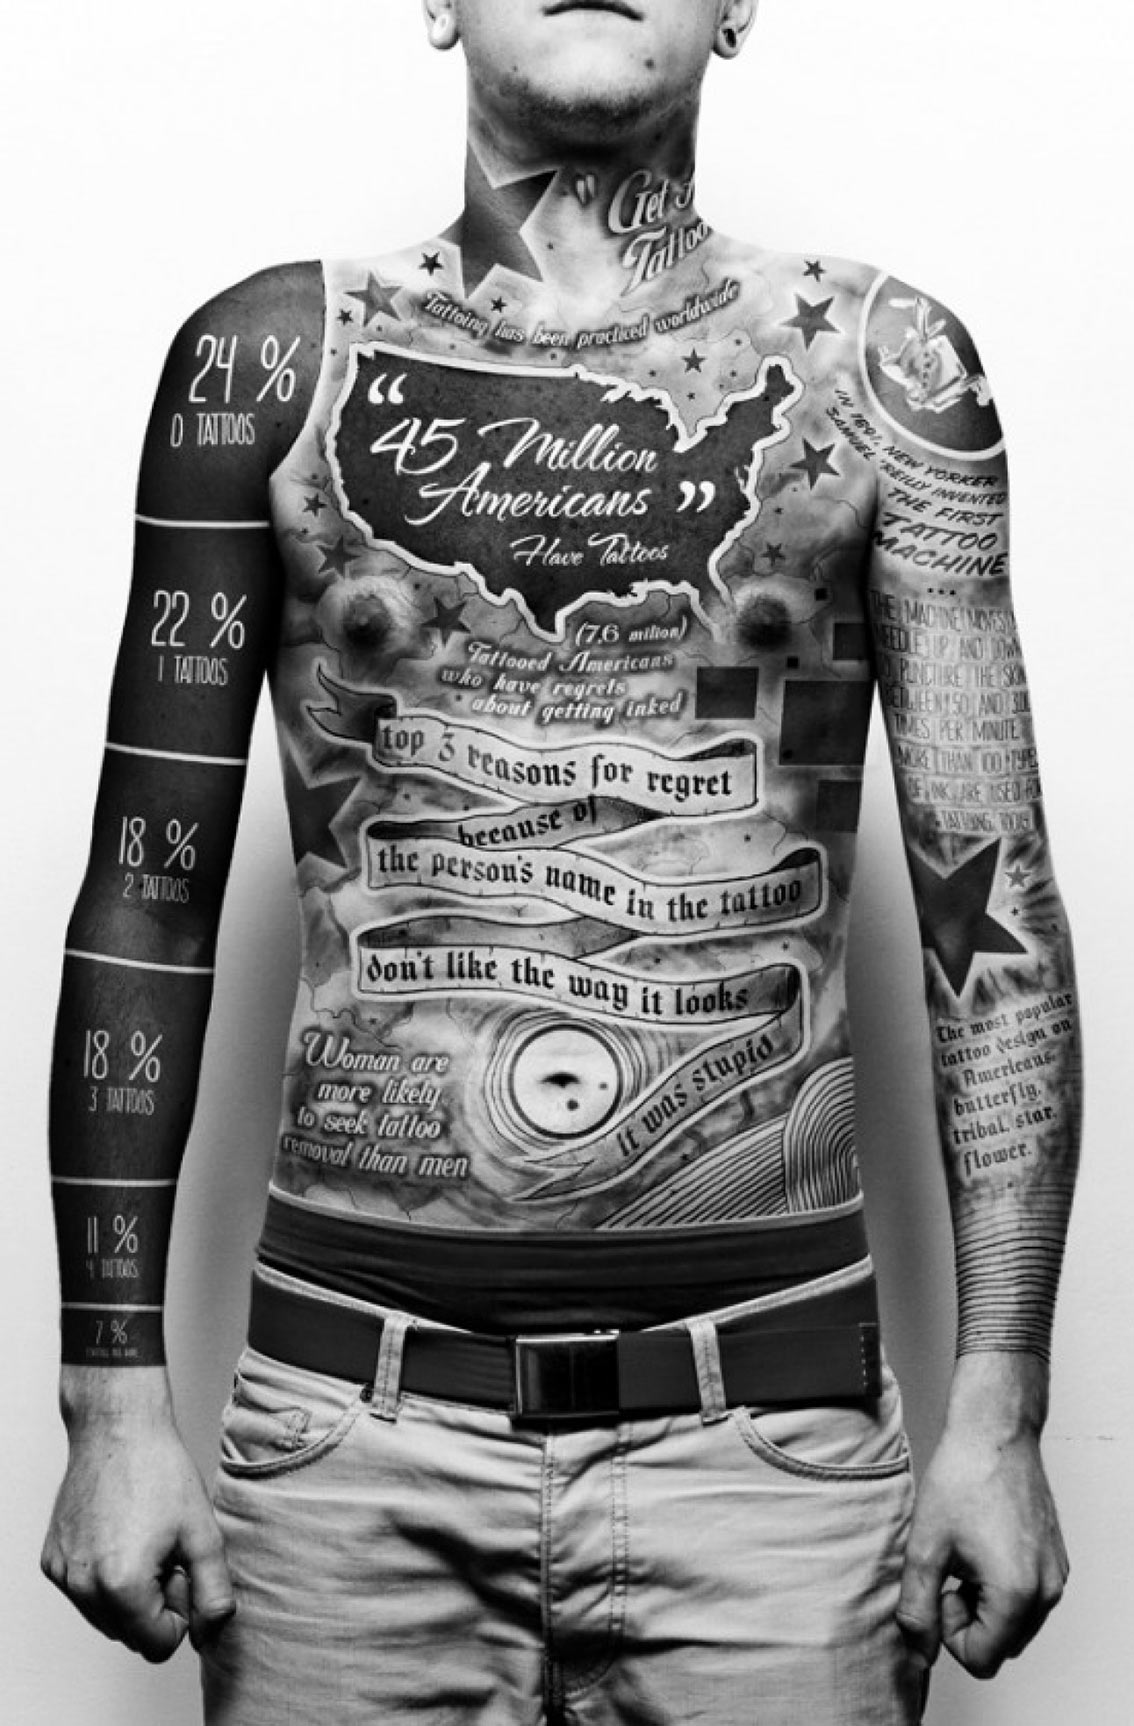 Tattoo Infographic Inked in Full-Body